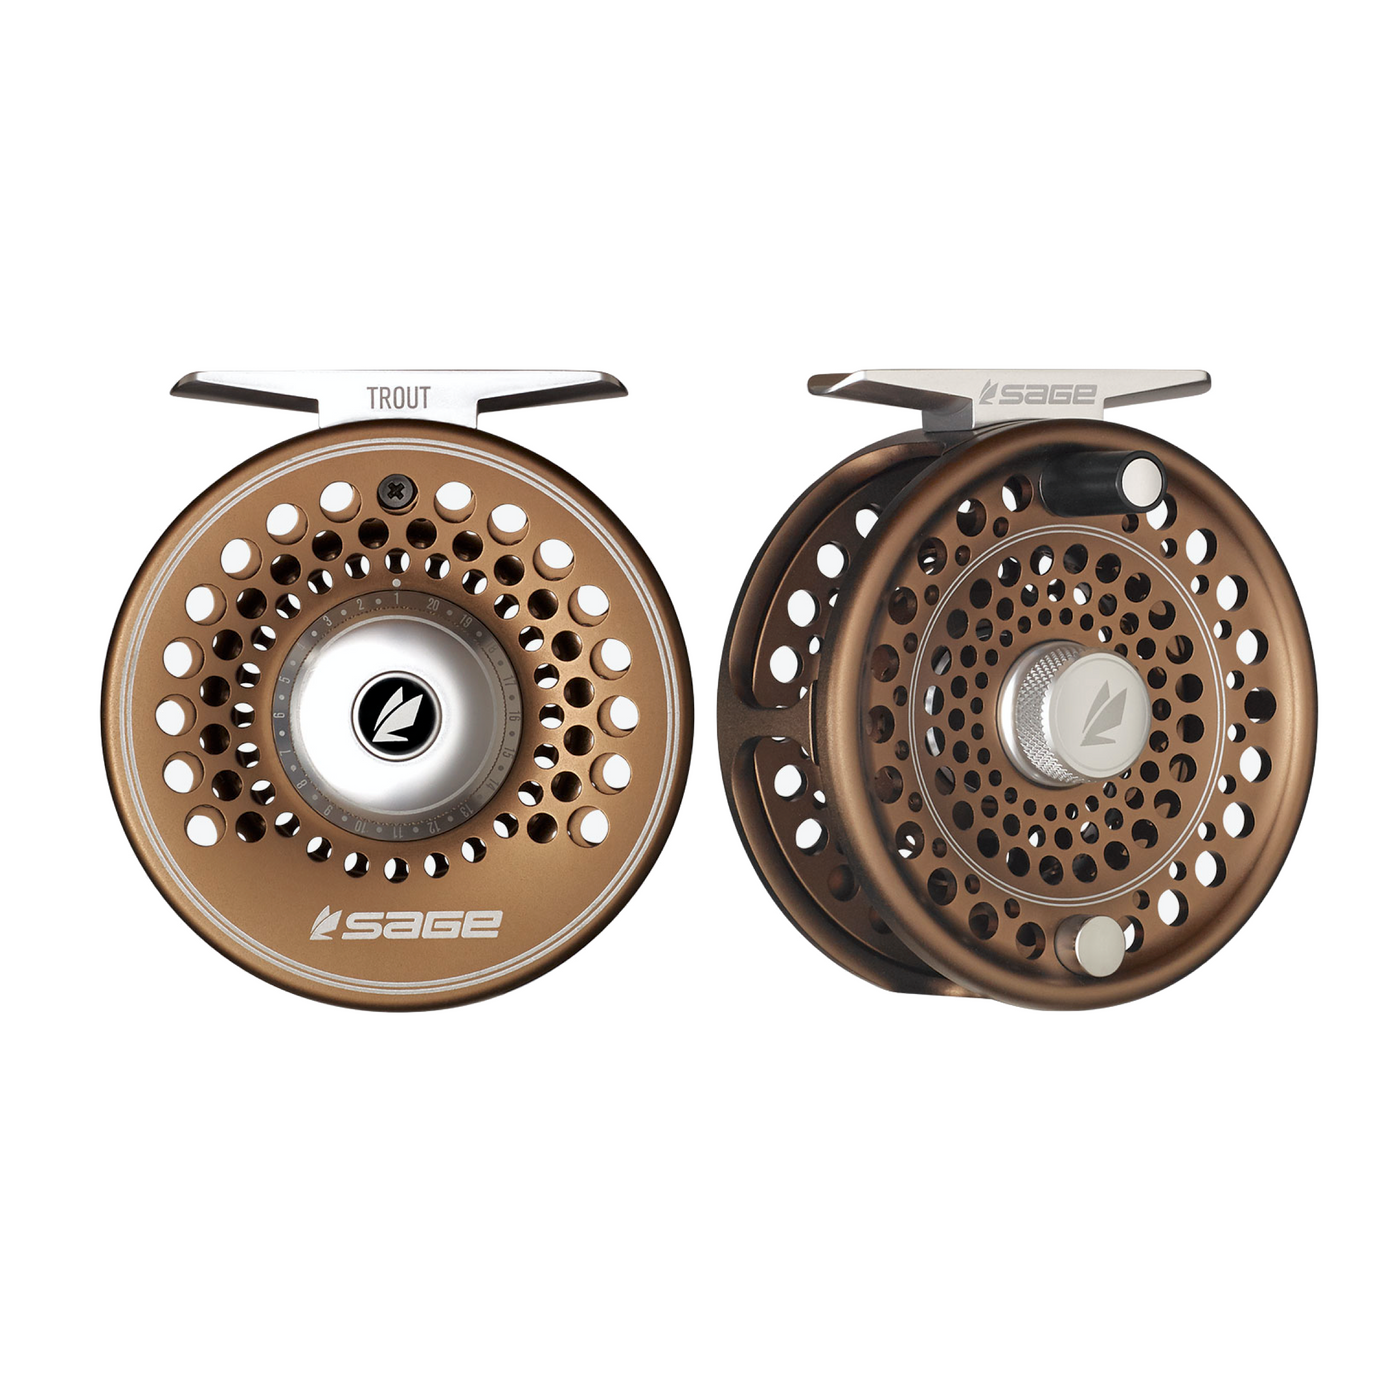 Sage Trout 2/3/4 Fly Reel - Bronze